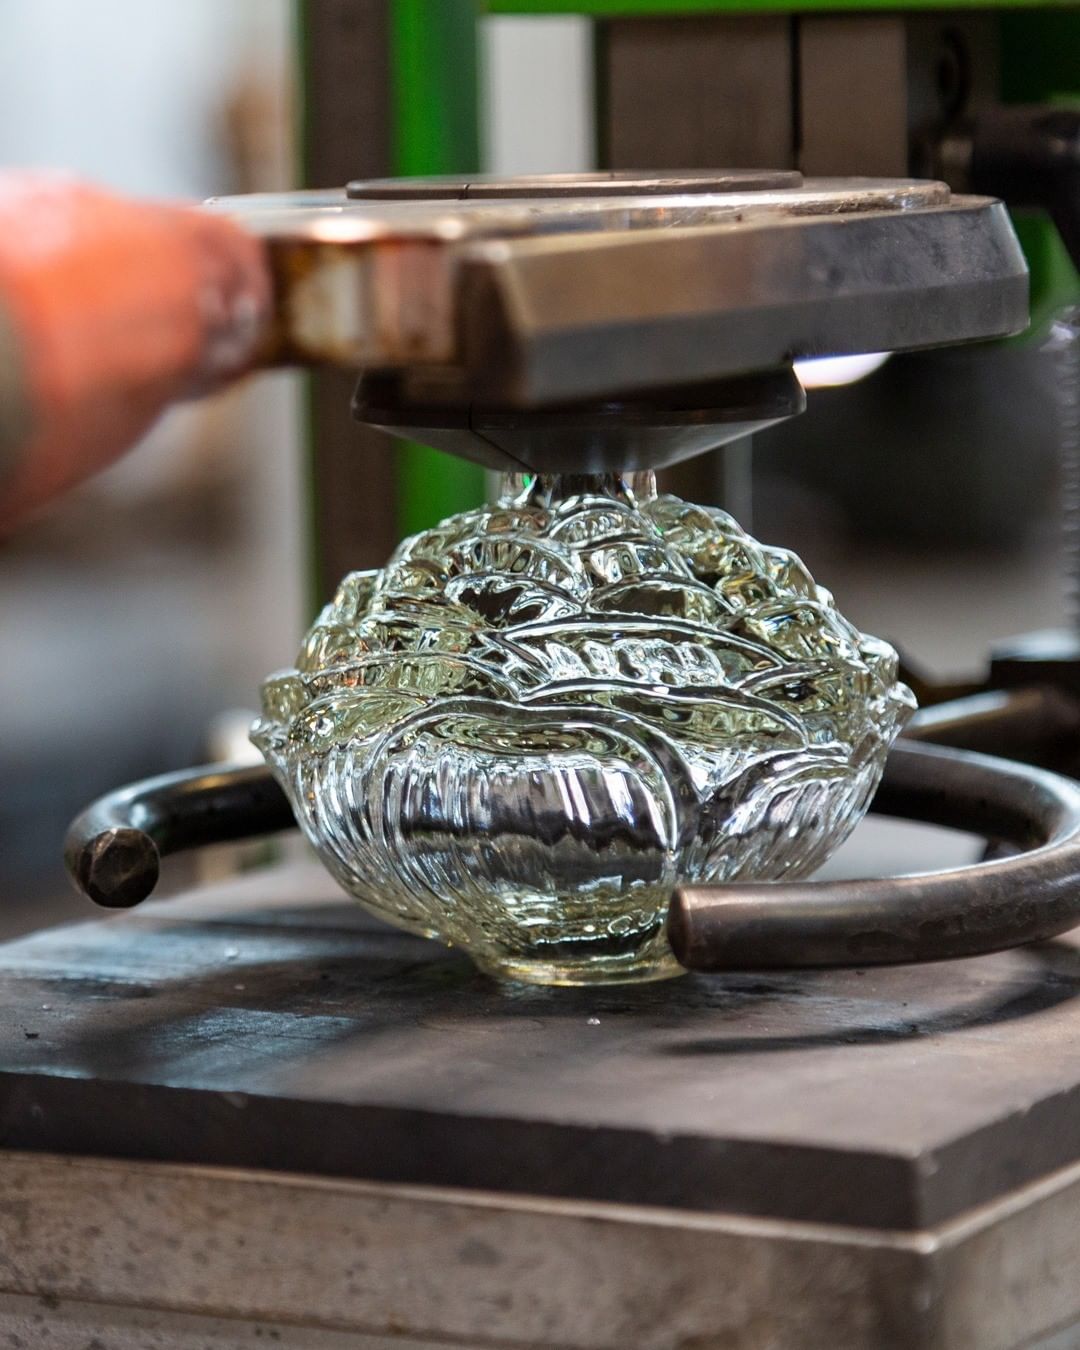 LALIQUE - The Pivoine limited edition 2021 flacon, starting to take shape with all its beautiful details. A truly impressive piece of crystal-making!
.
.
.
.
.
#pivoine #limitedcrystalflacon #pivoinef...